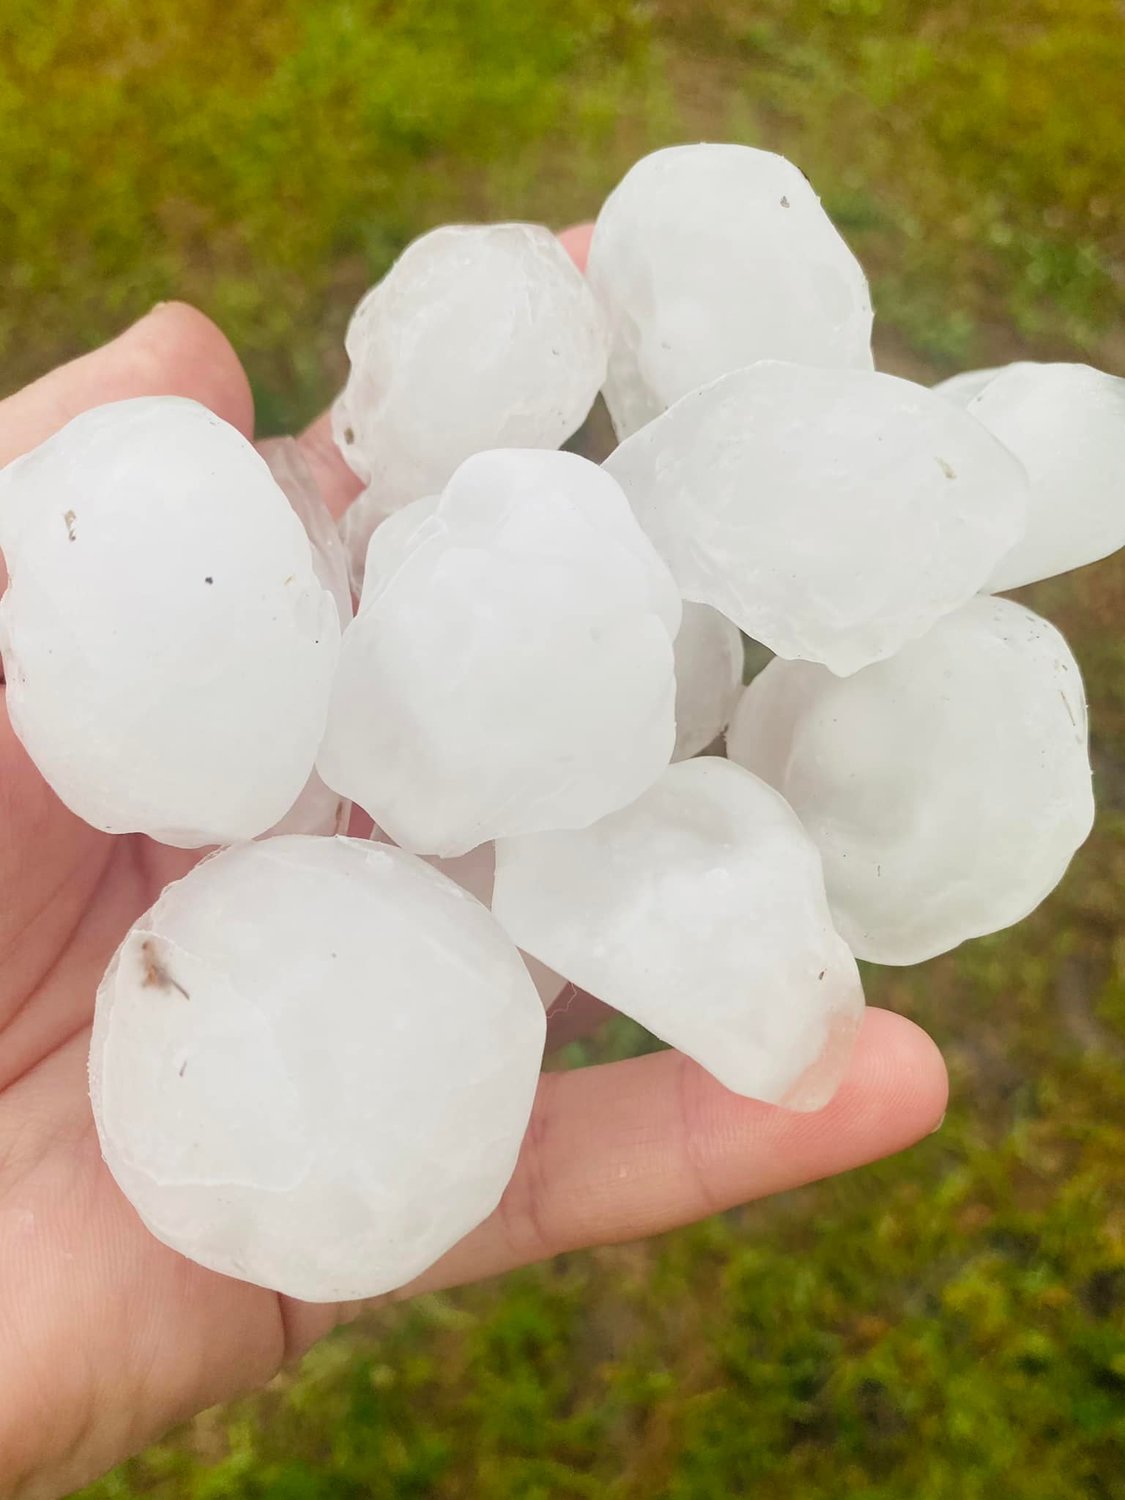 LABELLE -- Ashley Woosley shared this photo of hail that fell in LaBelle on April 4, 2022.